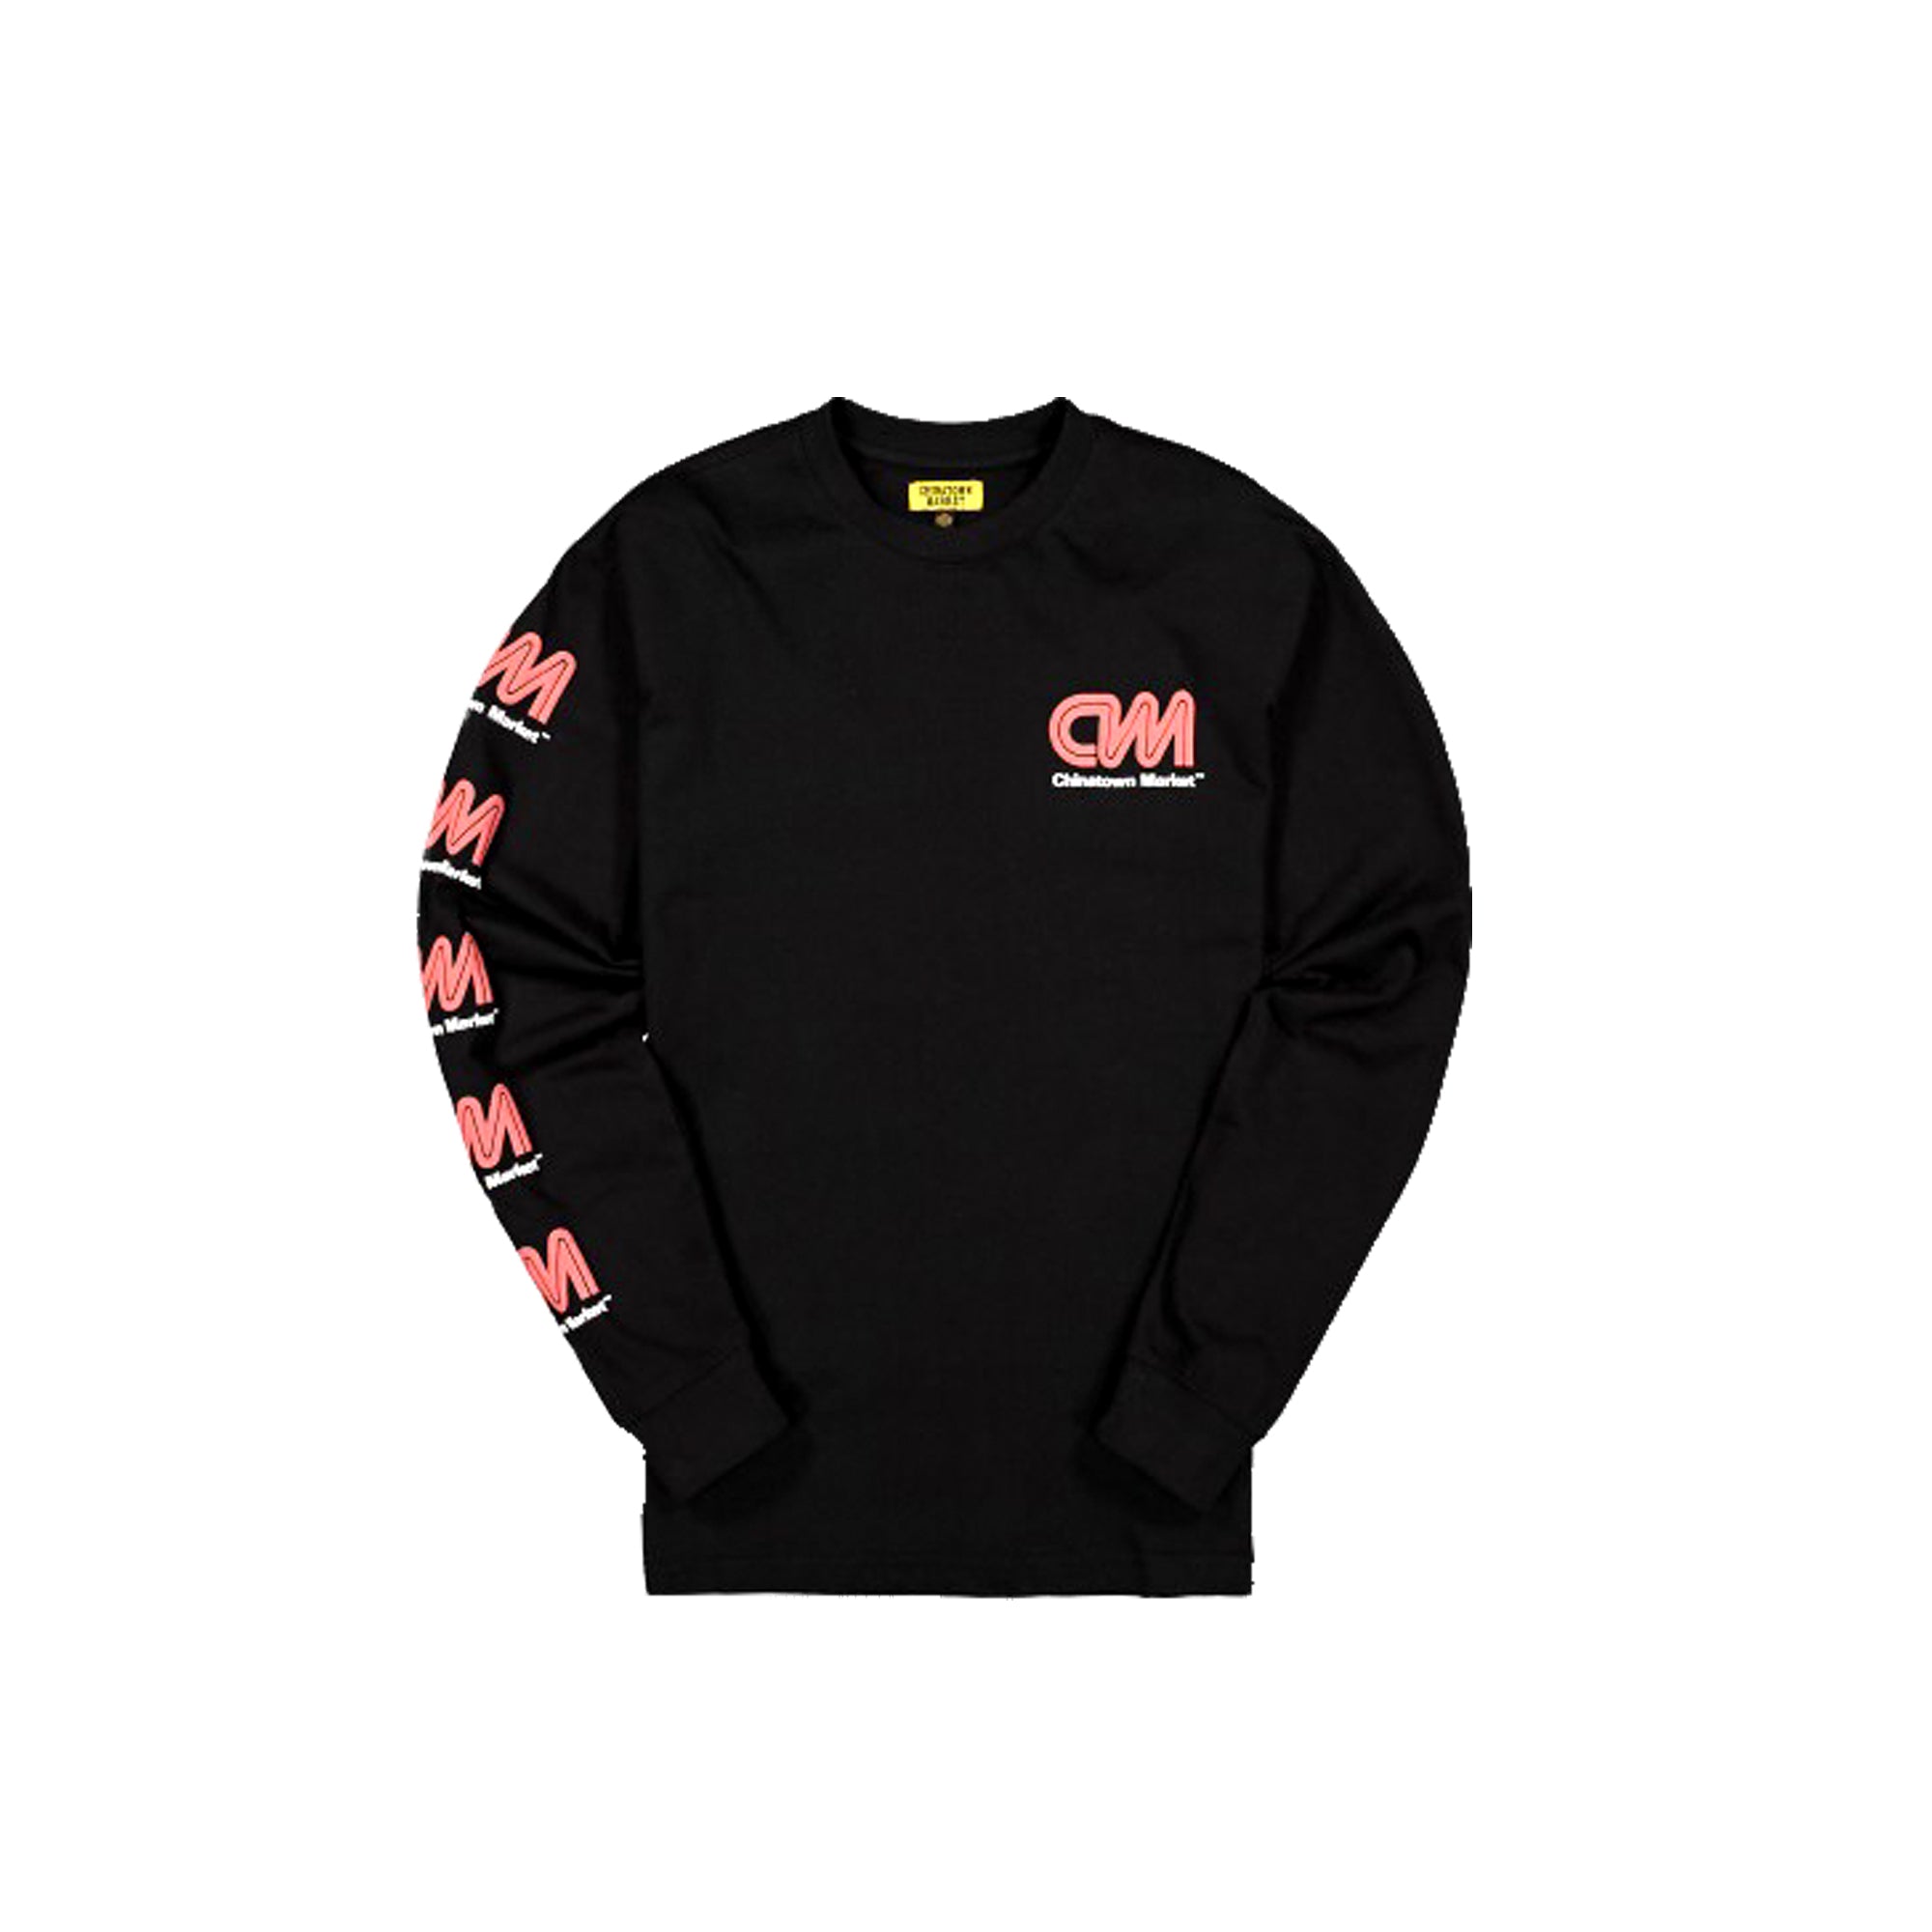 Chinatown Market Most Trusted L/S Tee